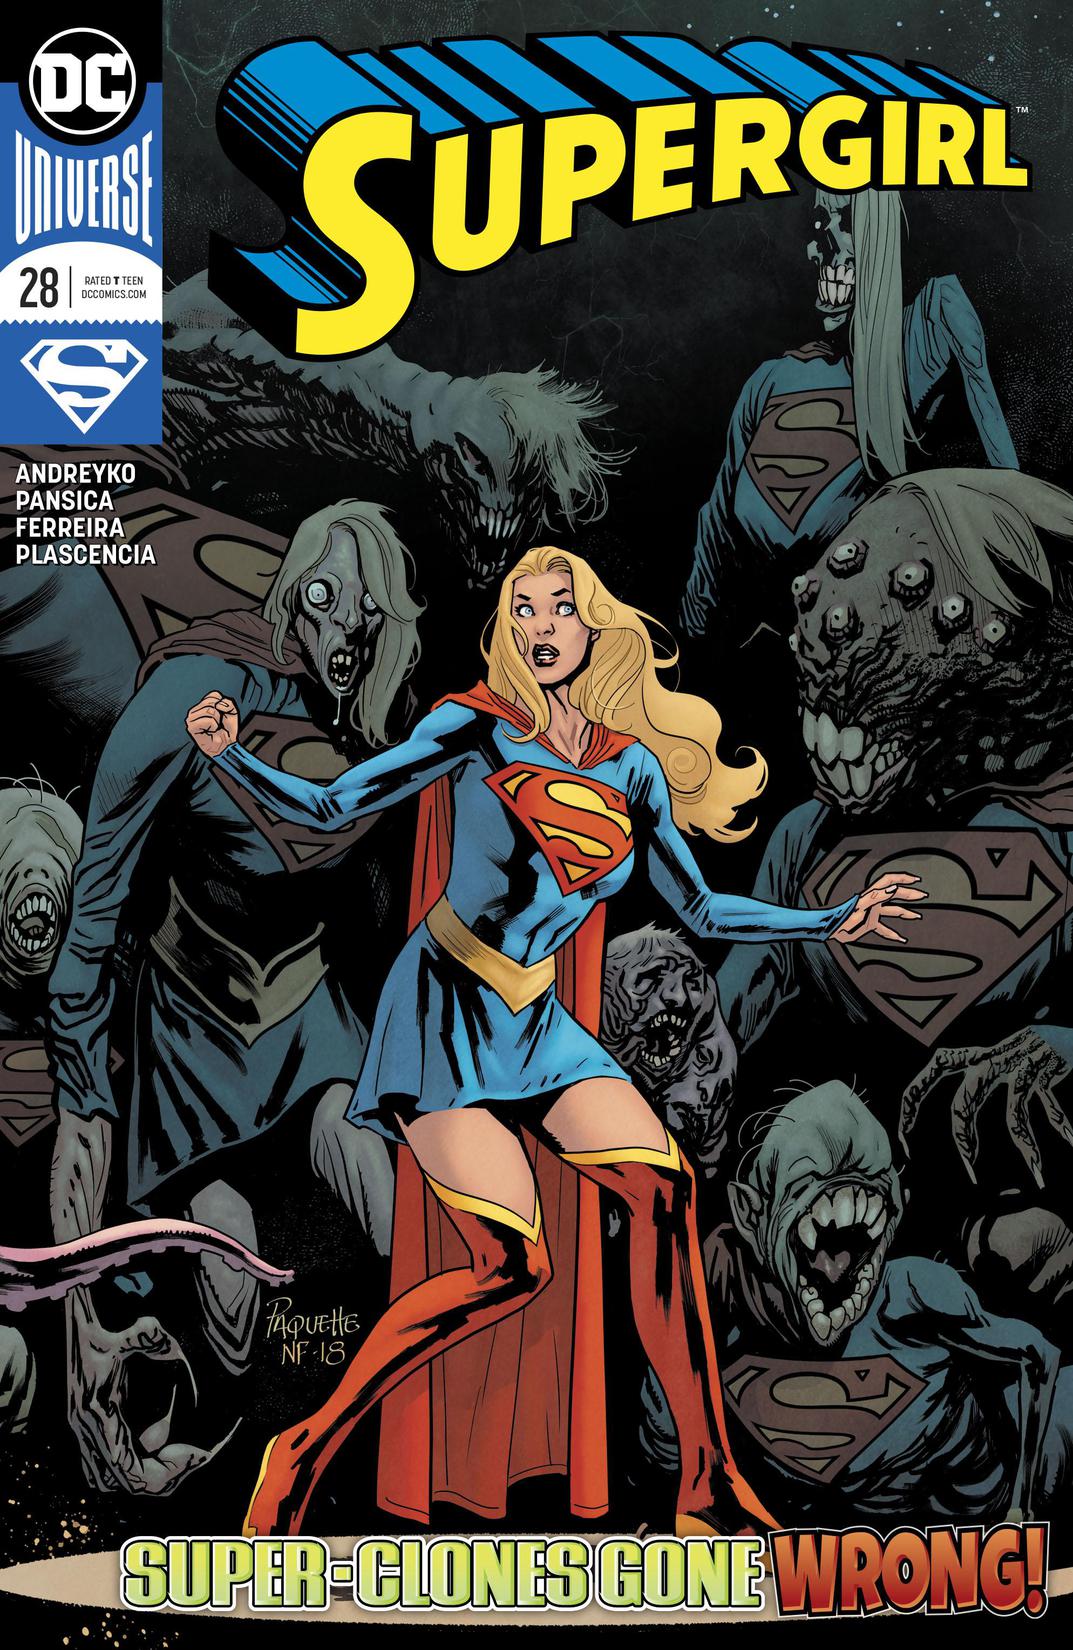 Supergirl (2016-) #28 preview images